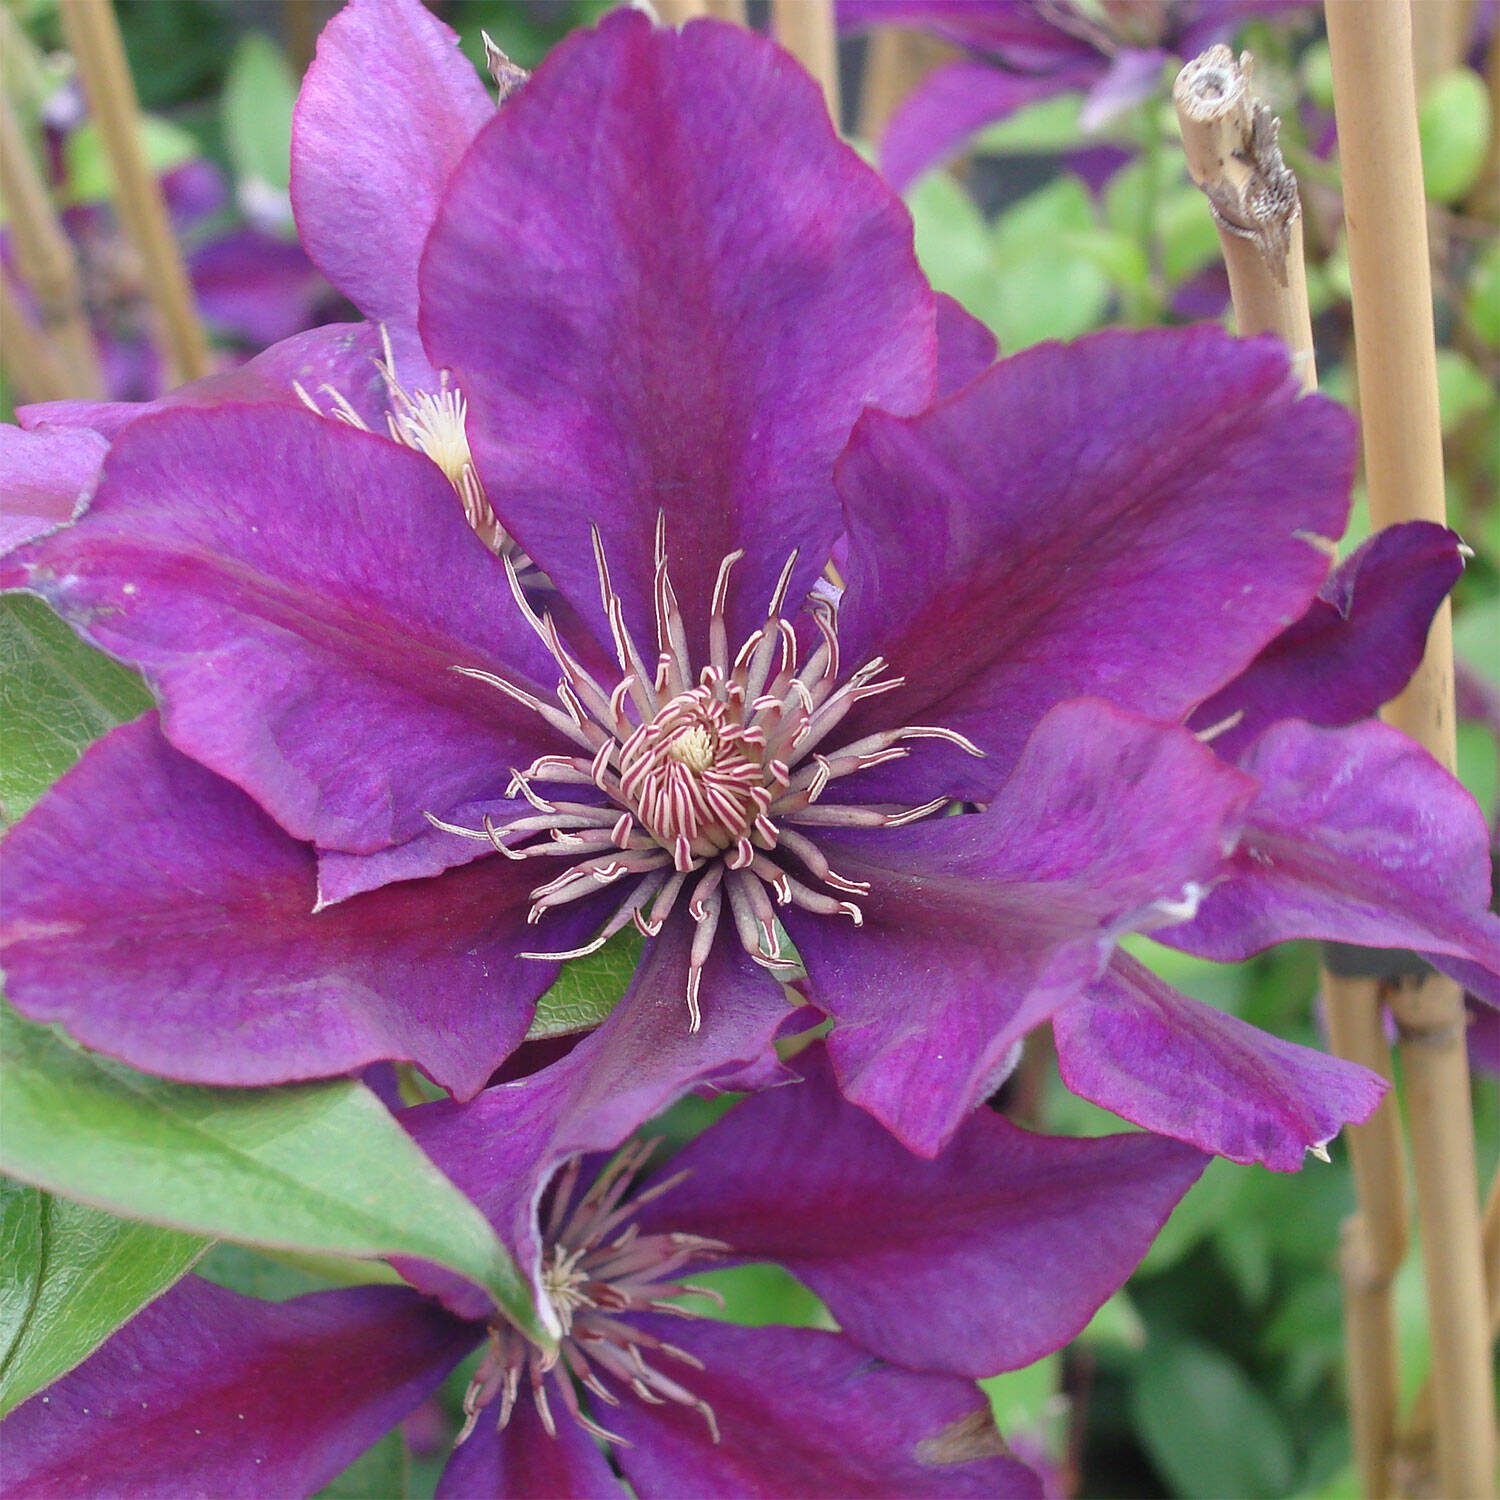  Waldrebe 'Picardy' TM - Clematis 'Picardy' TM